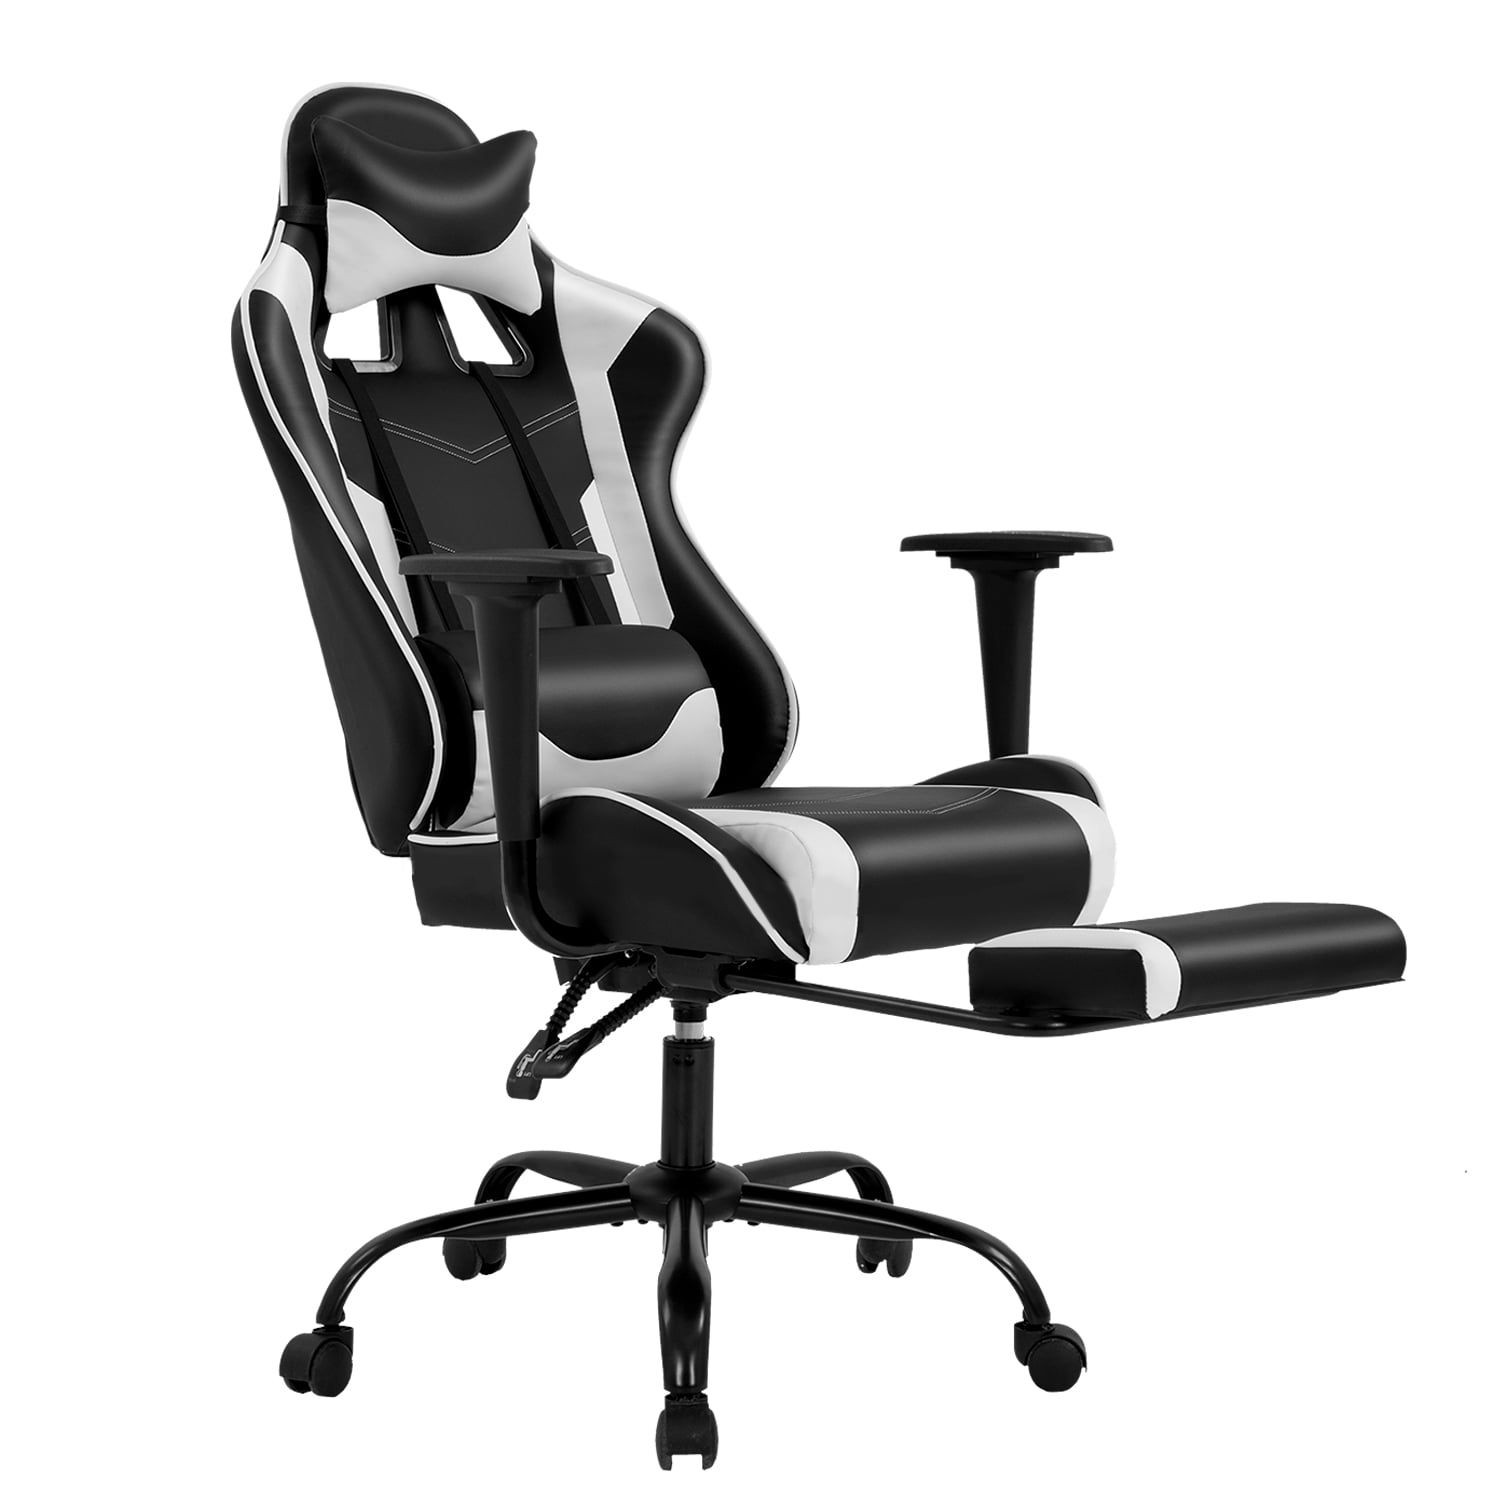 White Home Office Racing Gaming Chair w/ Footrest High Back Swivel Recliner Seat 